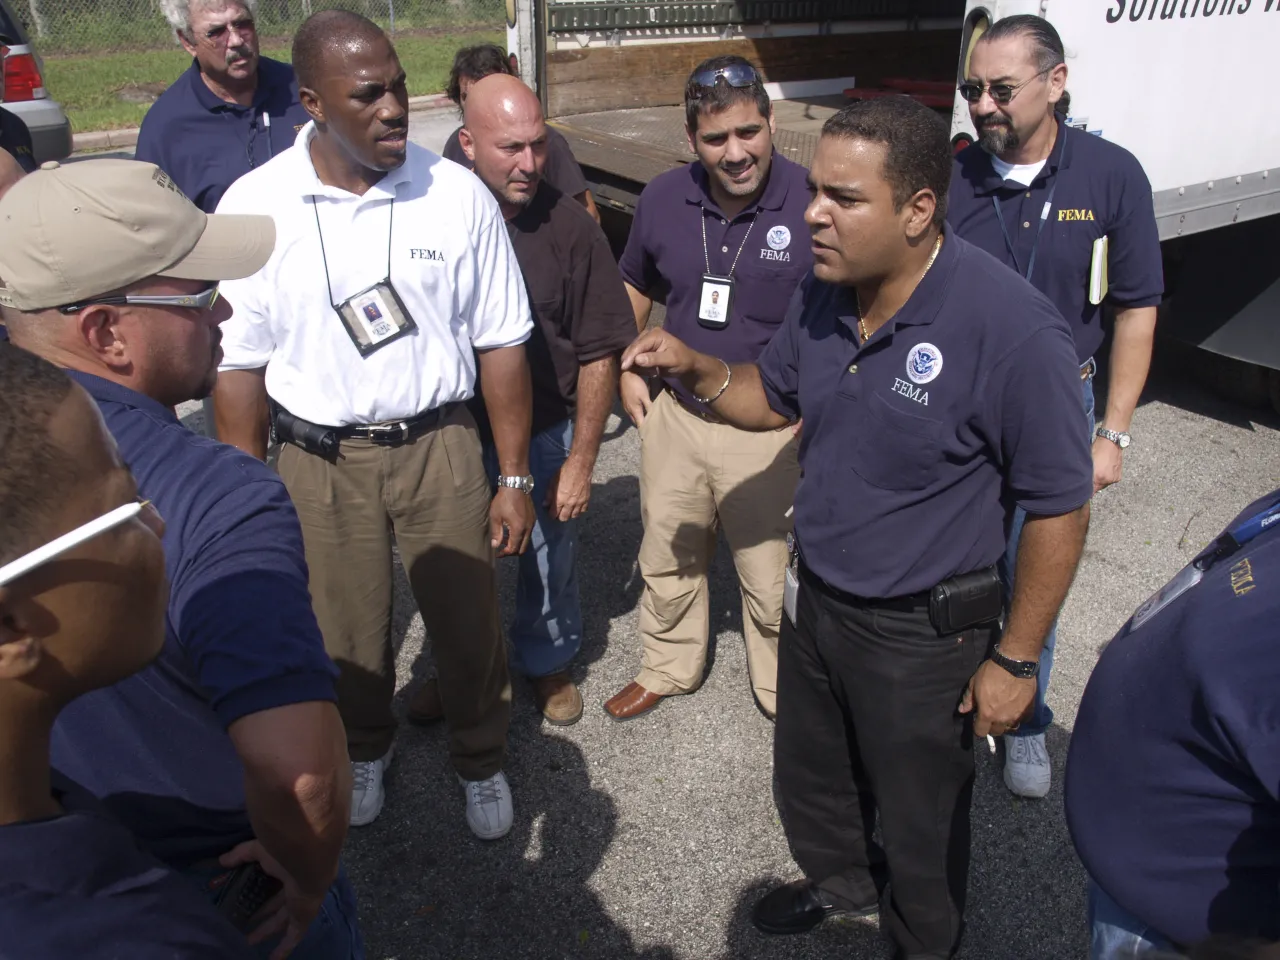 Image: FEMA employees discuss the plan for a diversity outreach project